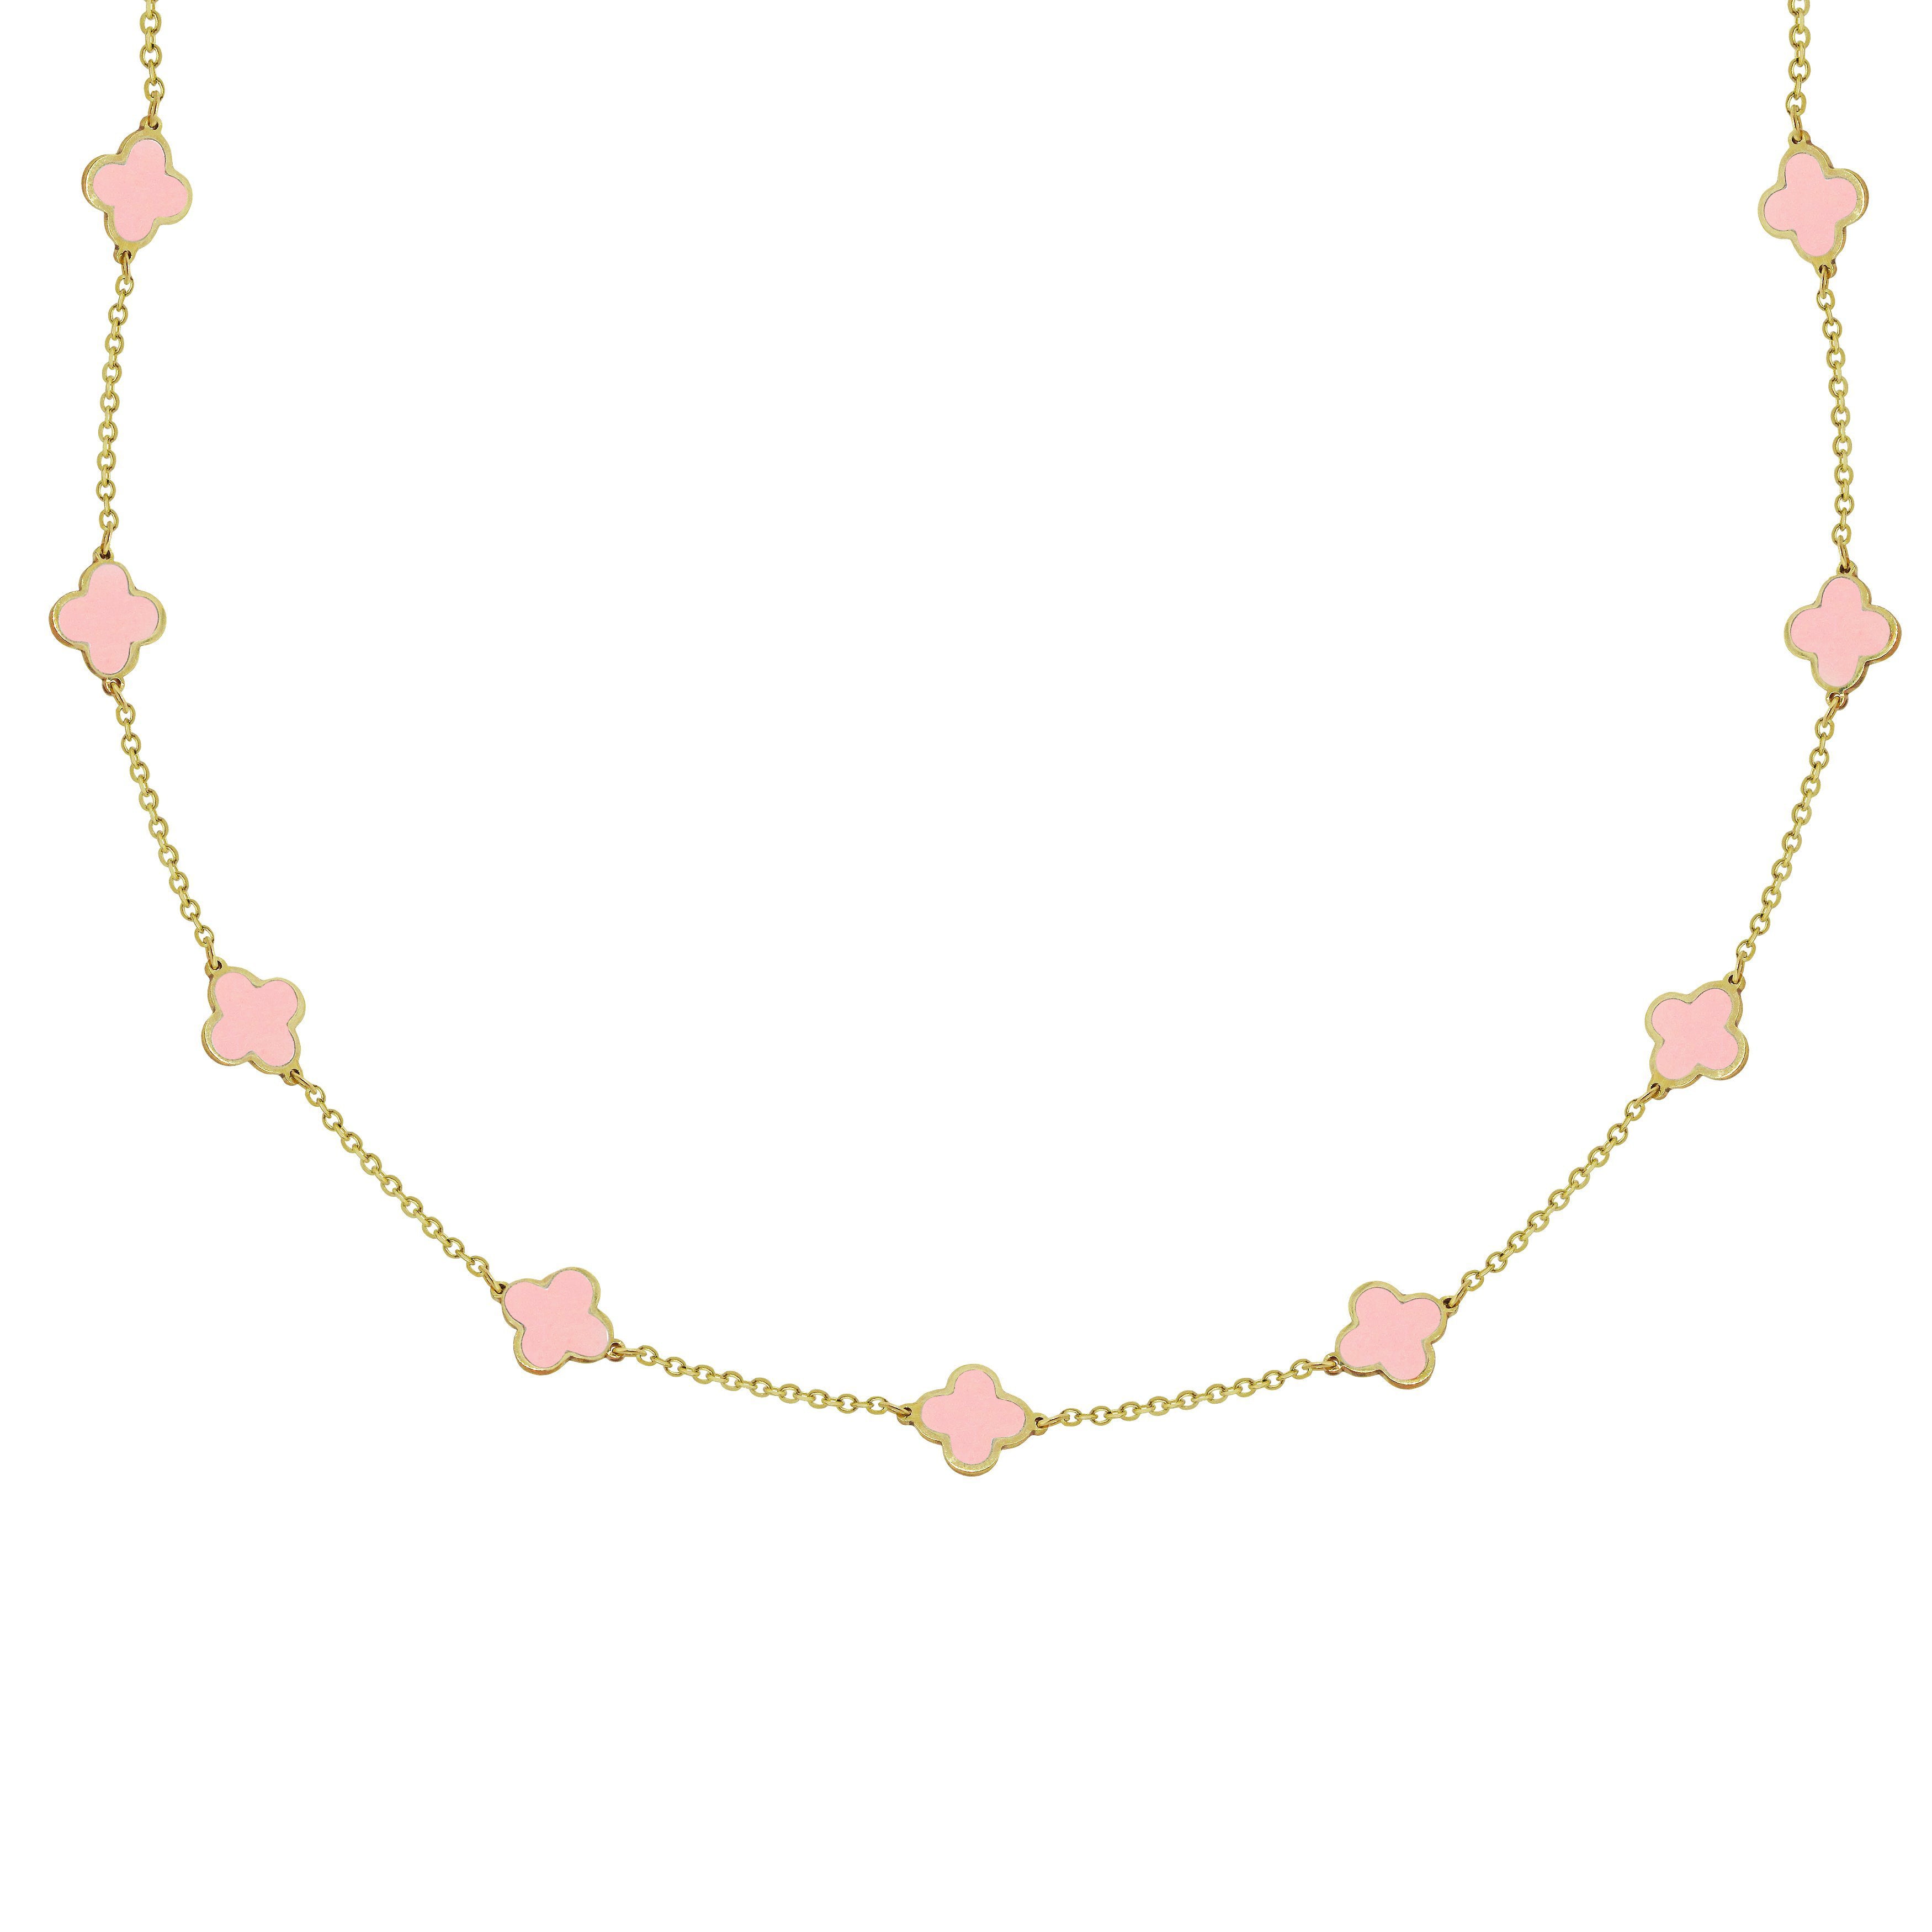 Colour Blossom Necklace, Pink Gold, Pink Mother-Of-Pearl, White Mother-Of- Pearl And Diamond - Categories Q94355